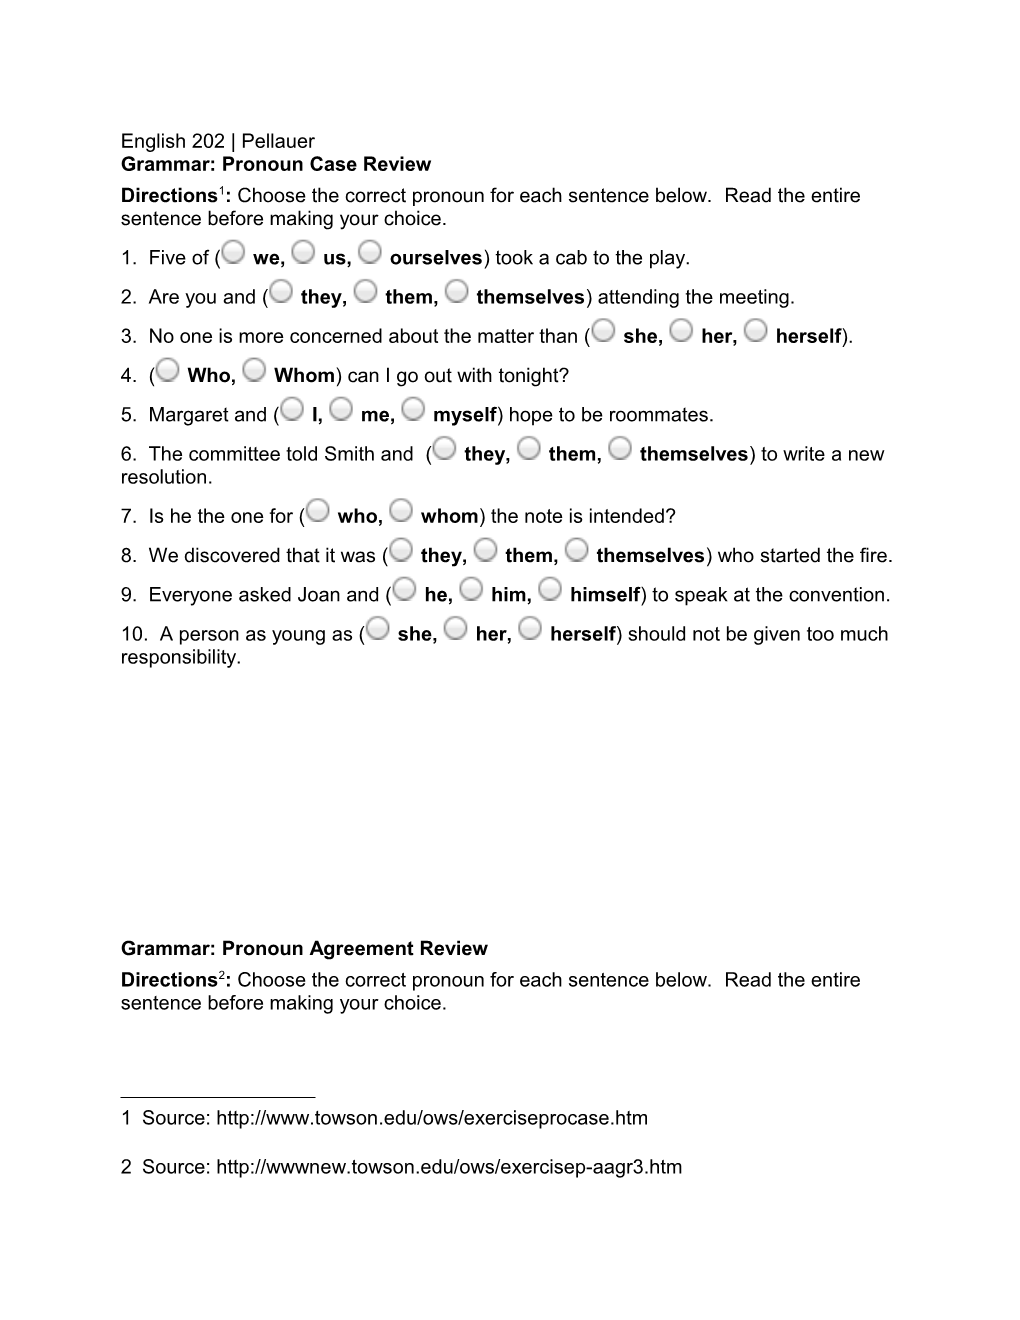 10 202 Pronoun Case and Agreement Review